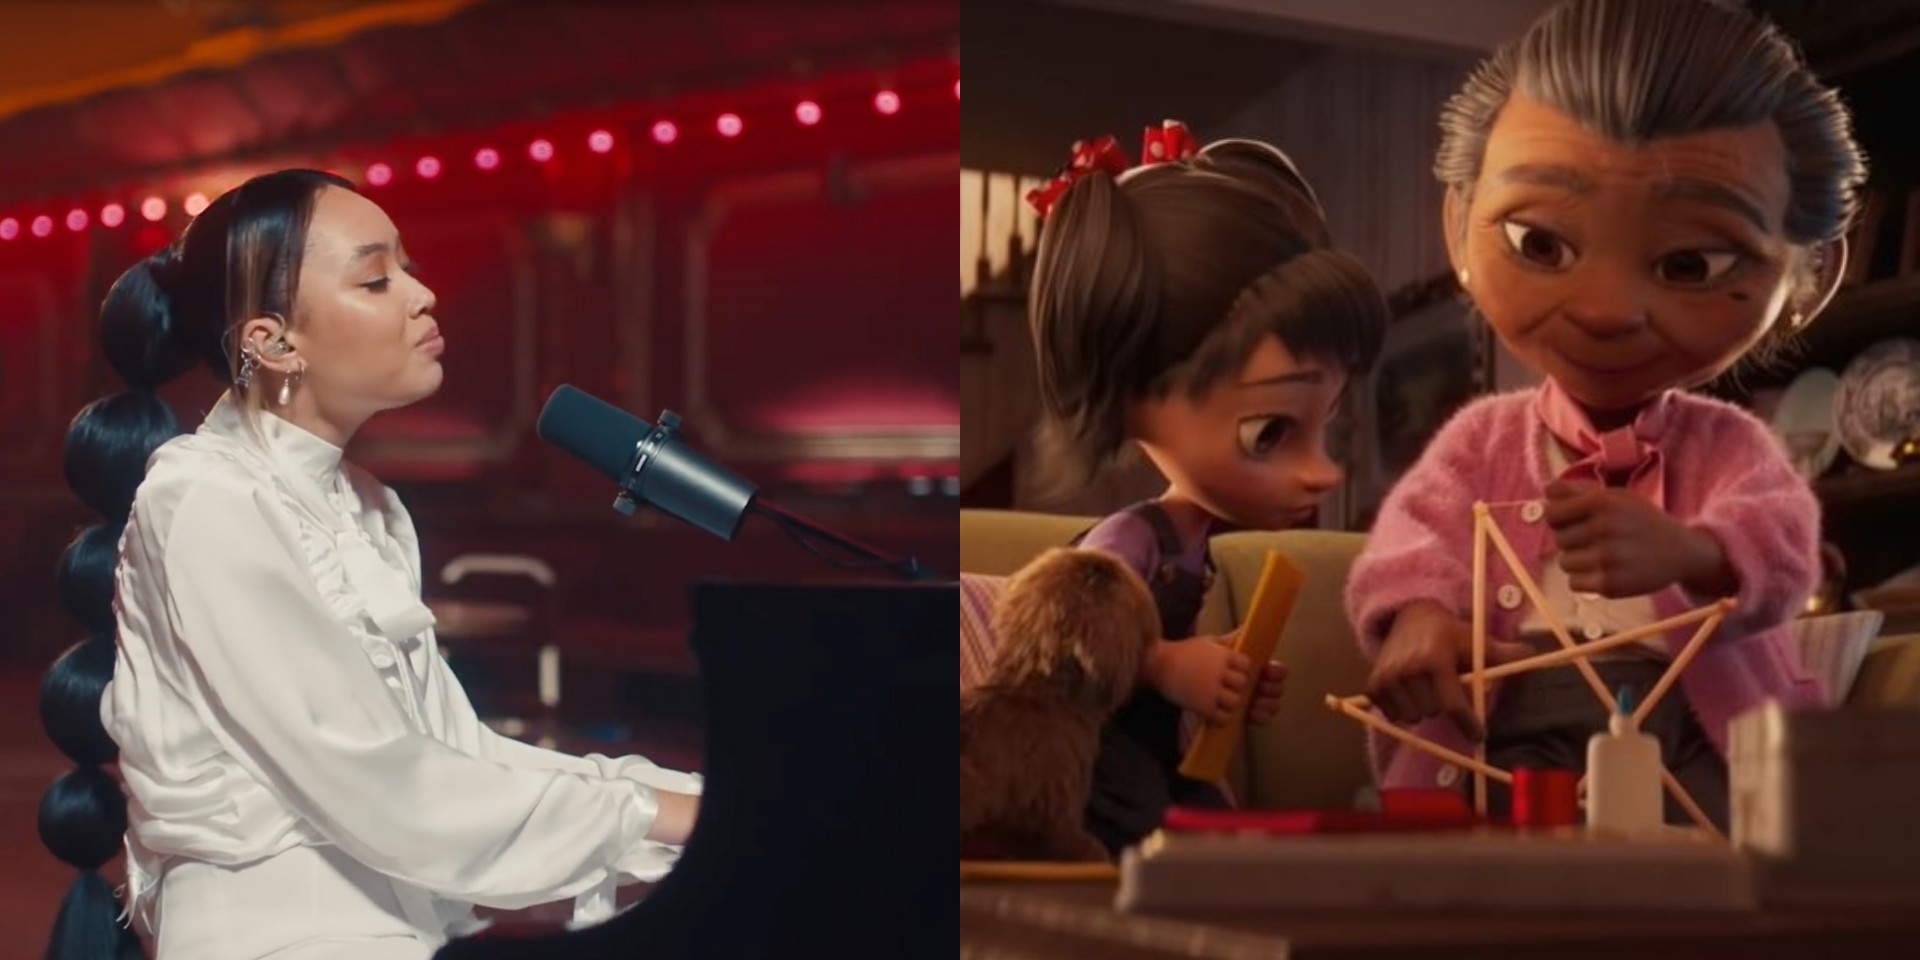 Griff shares 'Love Is A Compass' in Disney's new heartwarming campaign telling the story of a Filipino Christmas – watch